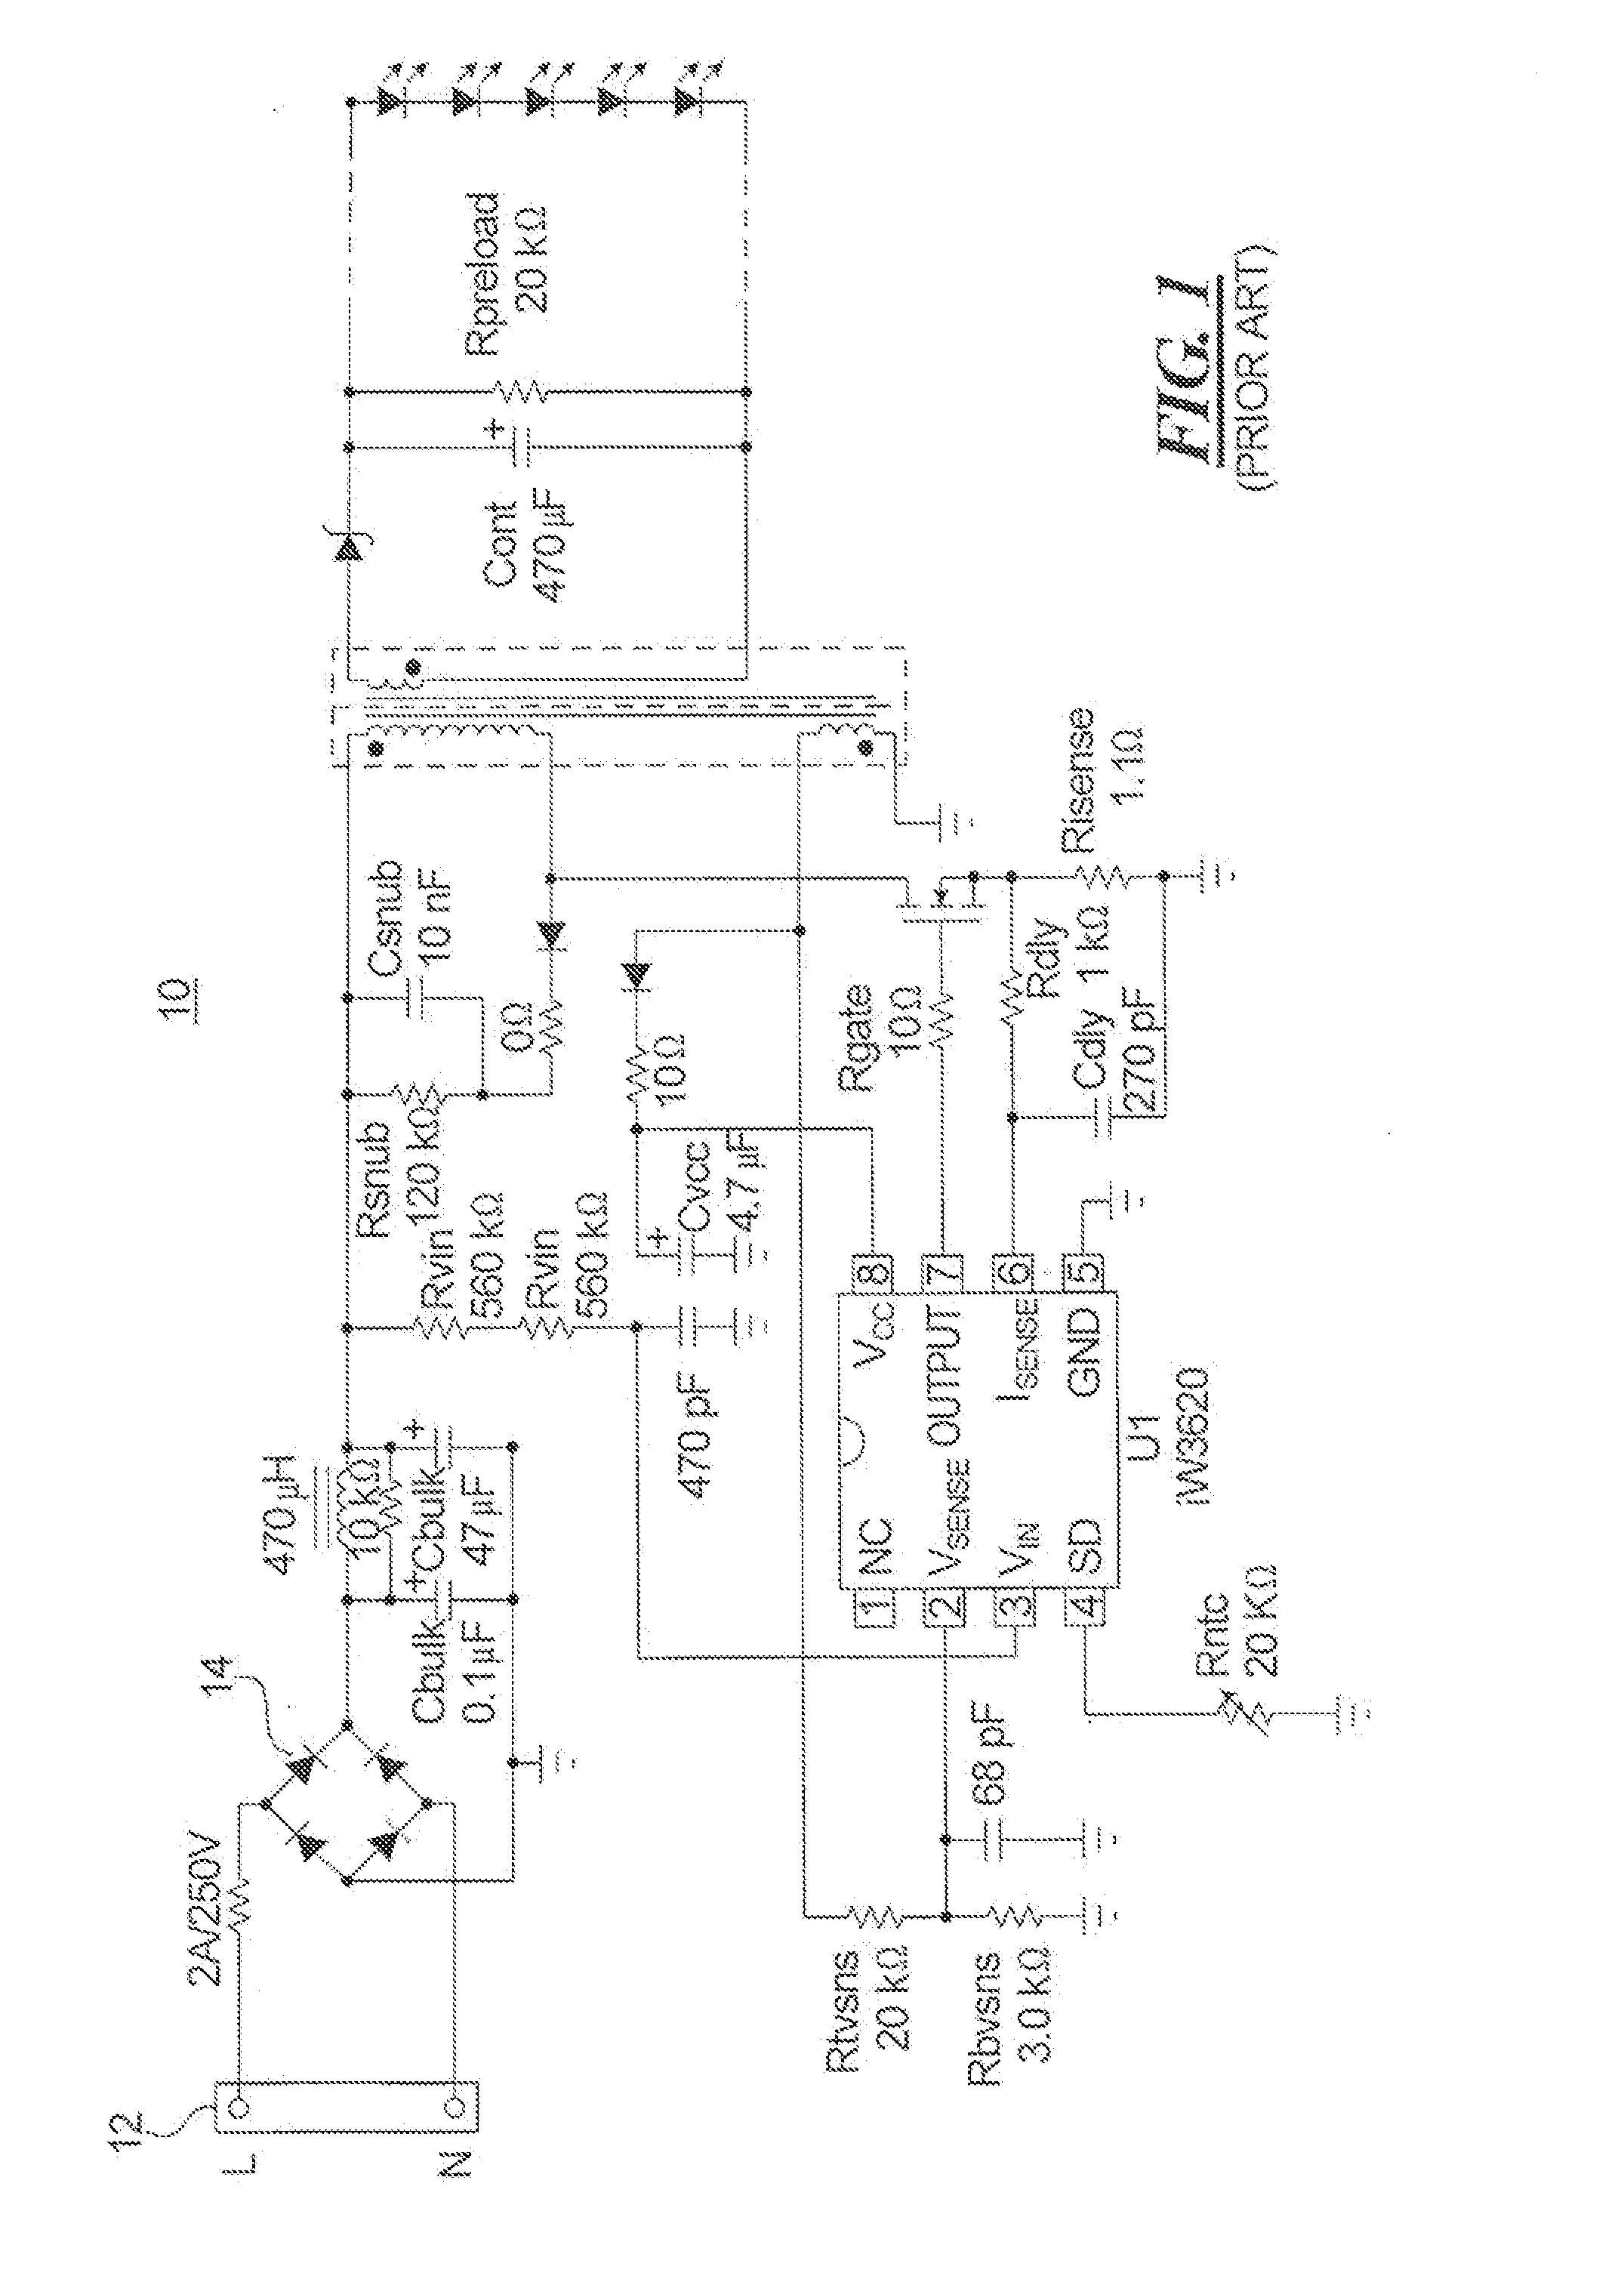 Method and Circuit For Driving Light-Emitting Diodes From Three-Phase Power Source